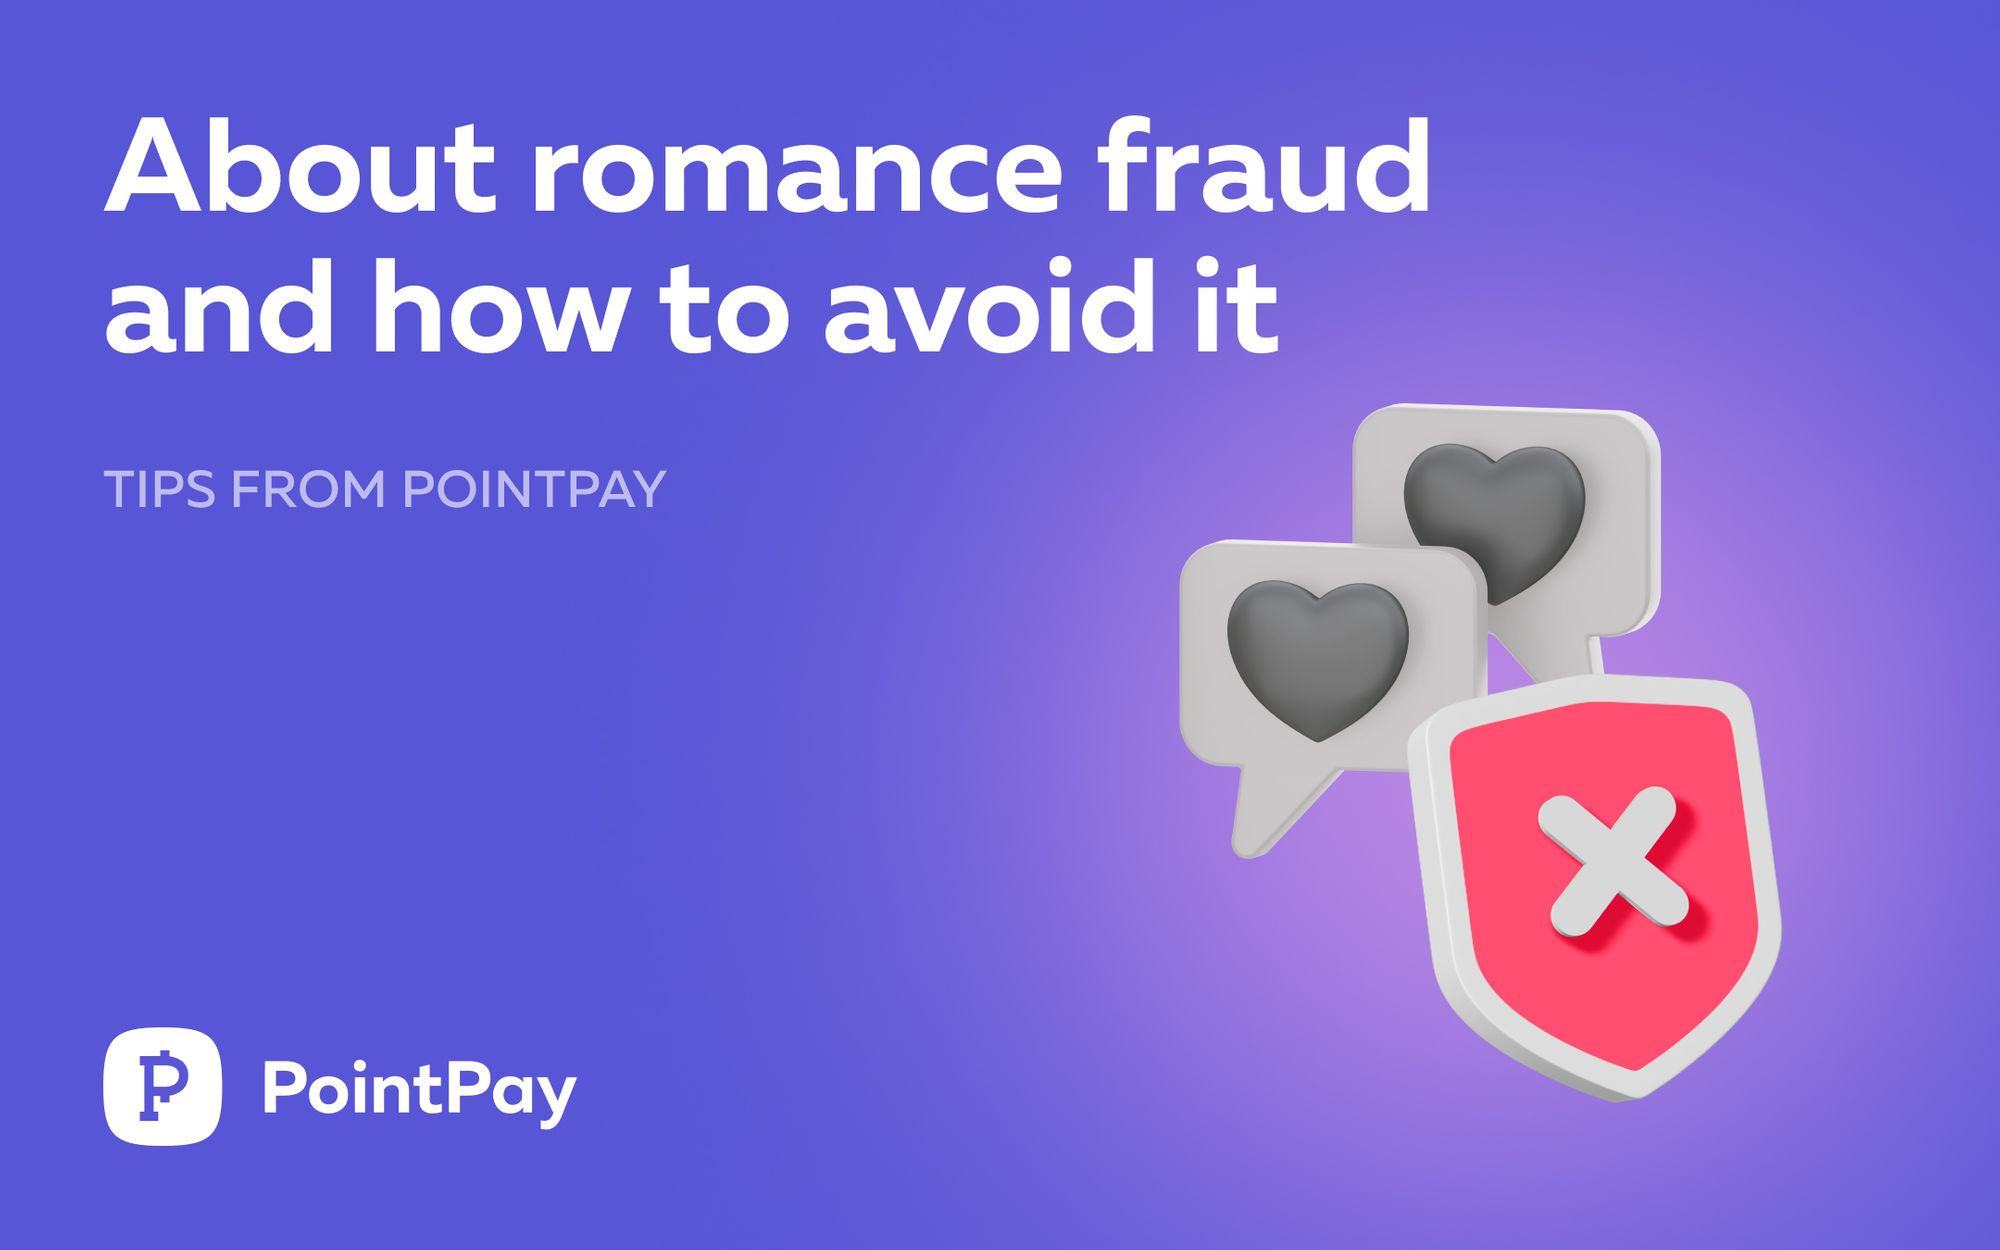 About Romance Fraud and How to Avoid It